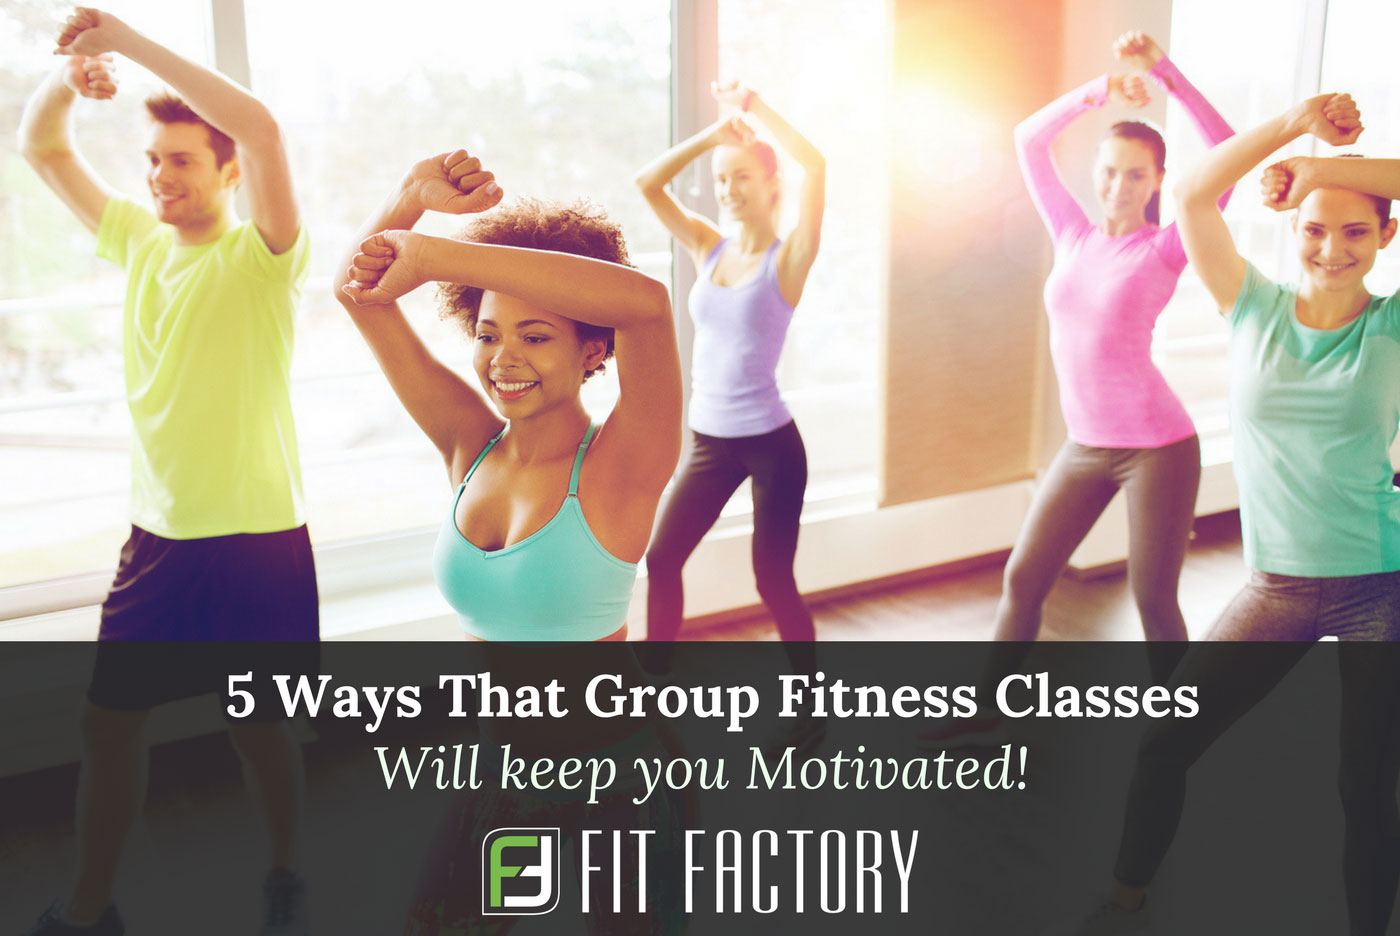 5 Ways That Group Fitness Classes Will Keep You Motivated